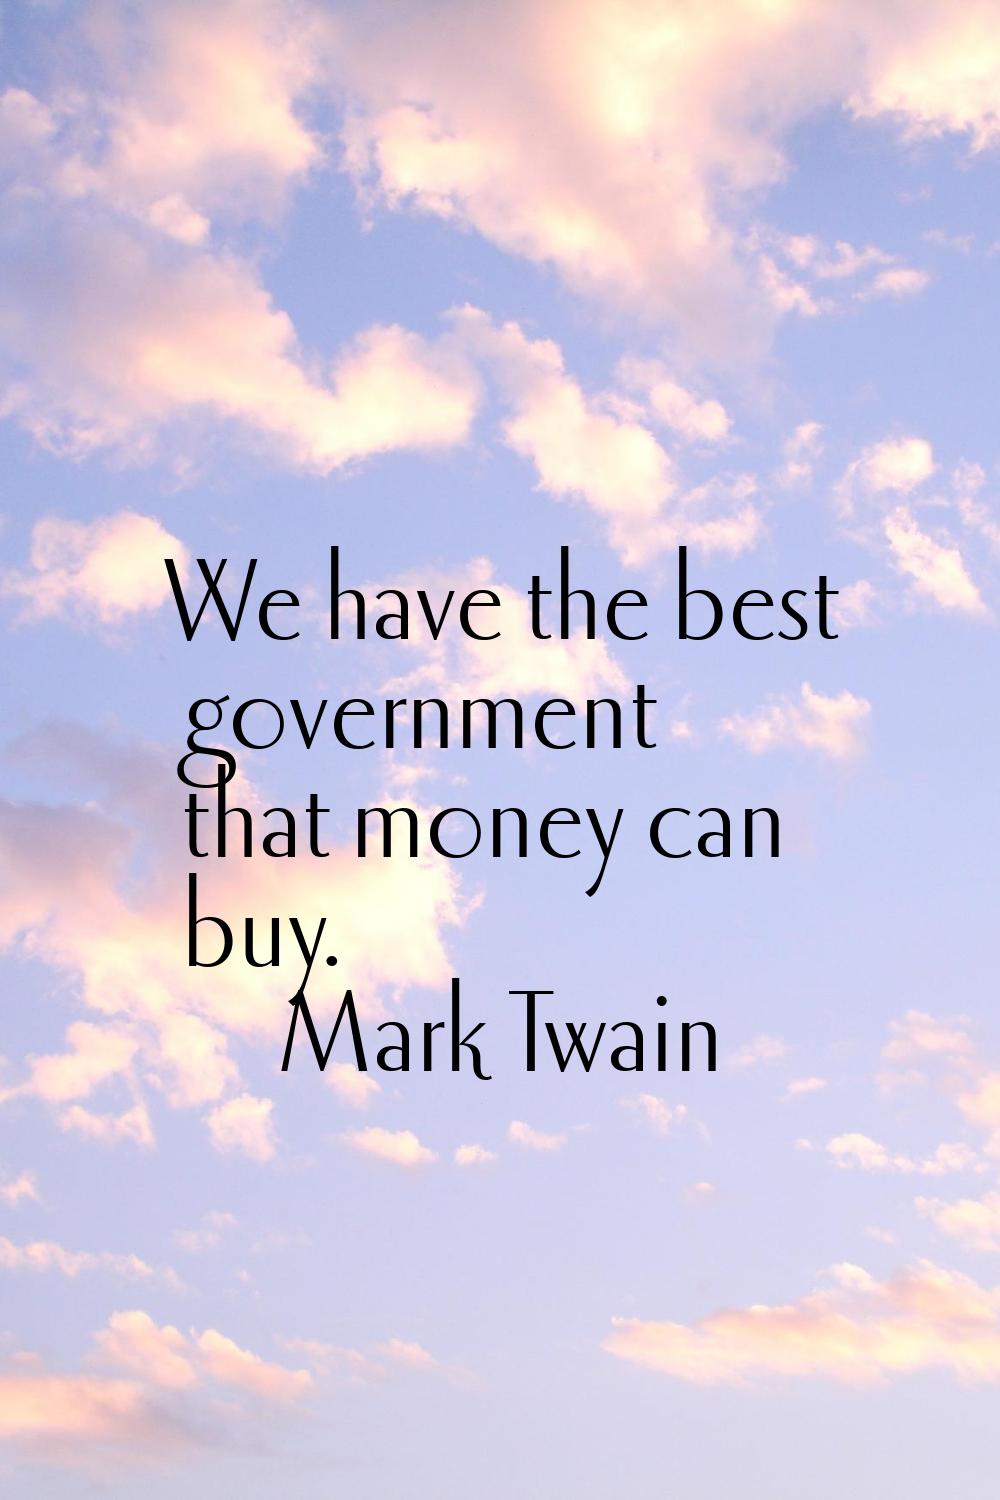 We have the best government that money can buy.